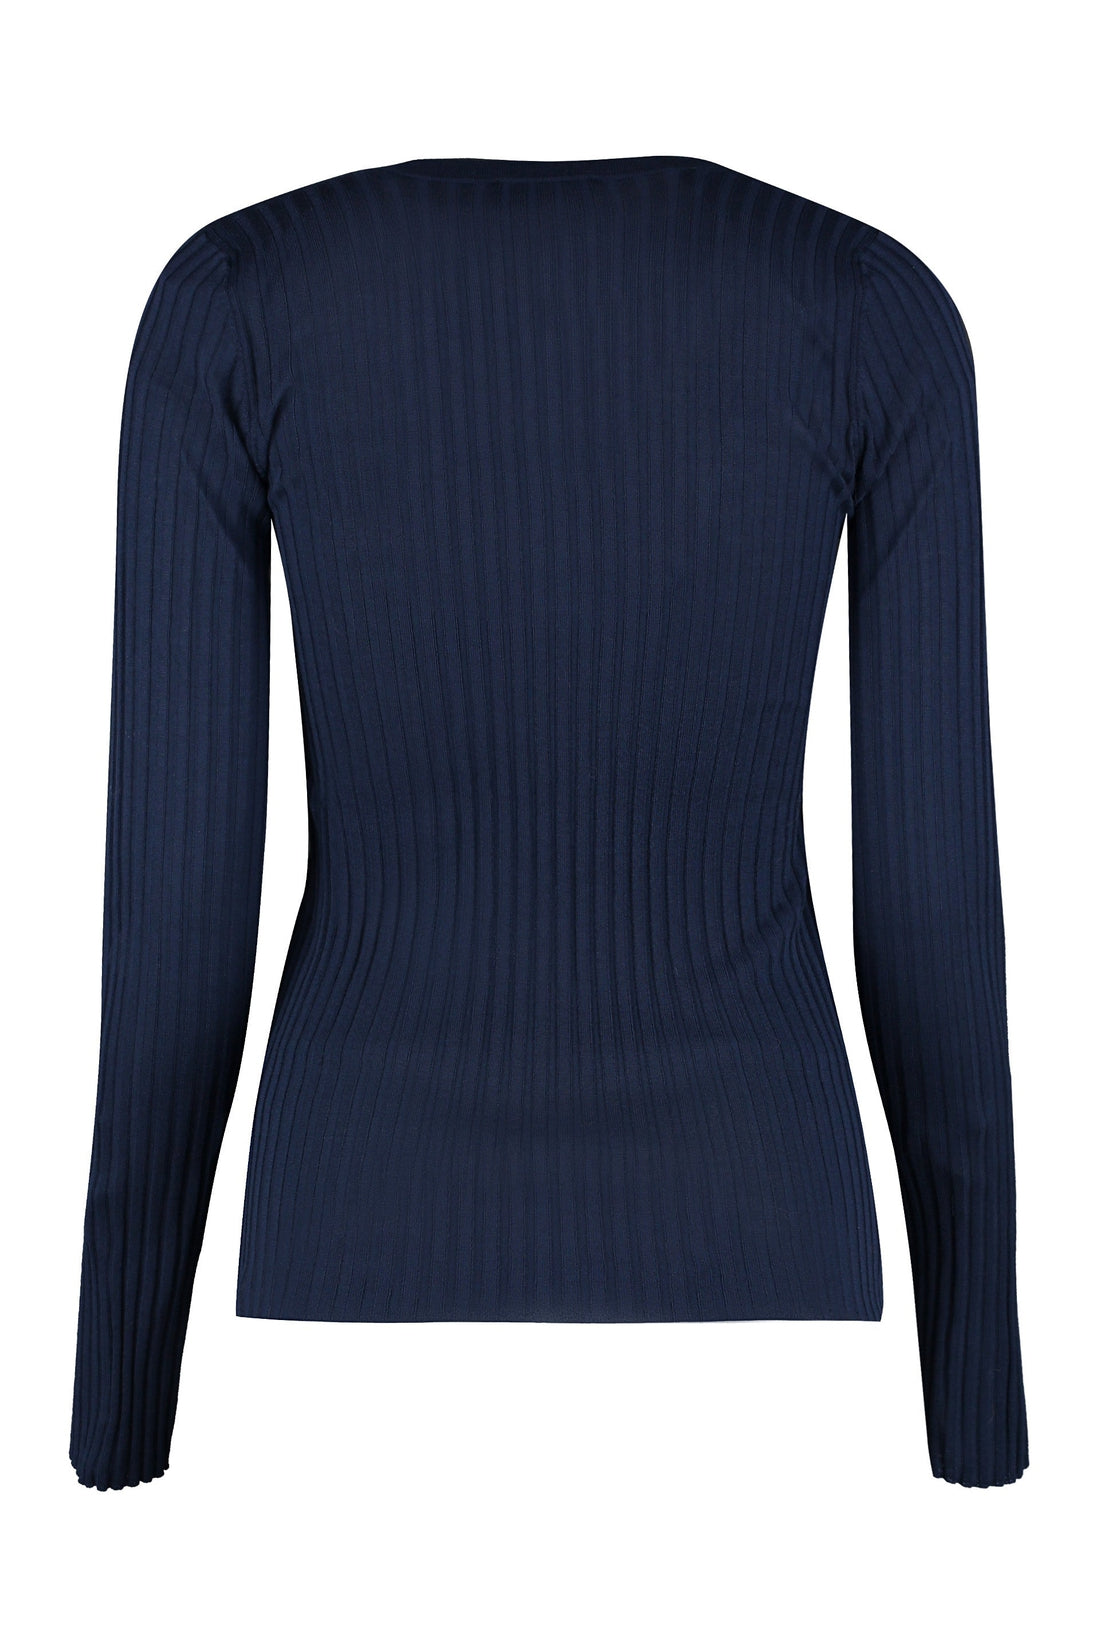 Roberto Collina-OUTLET-SALE-Long-sleeved top-ARCHIVIST